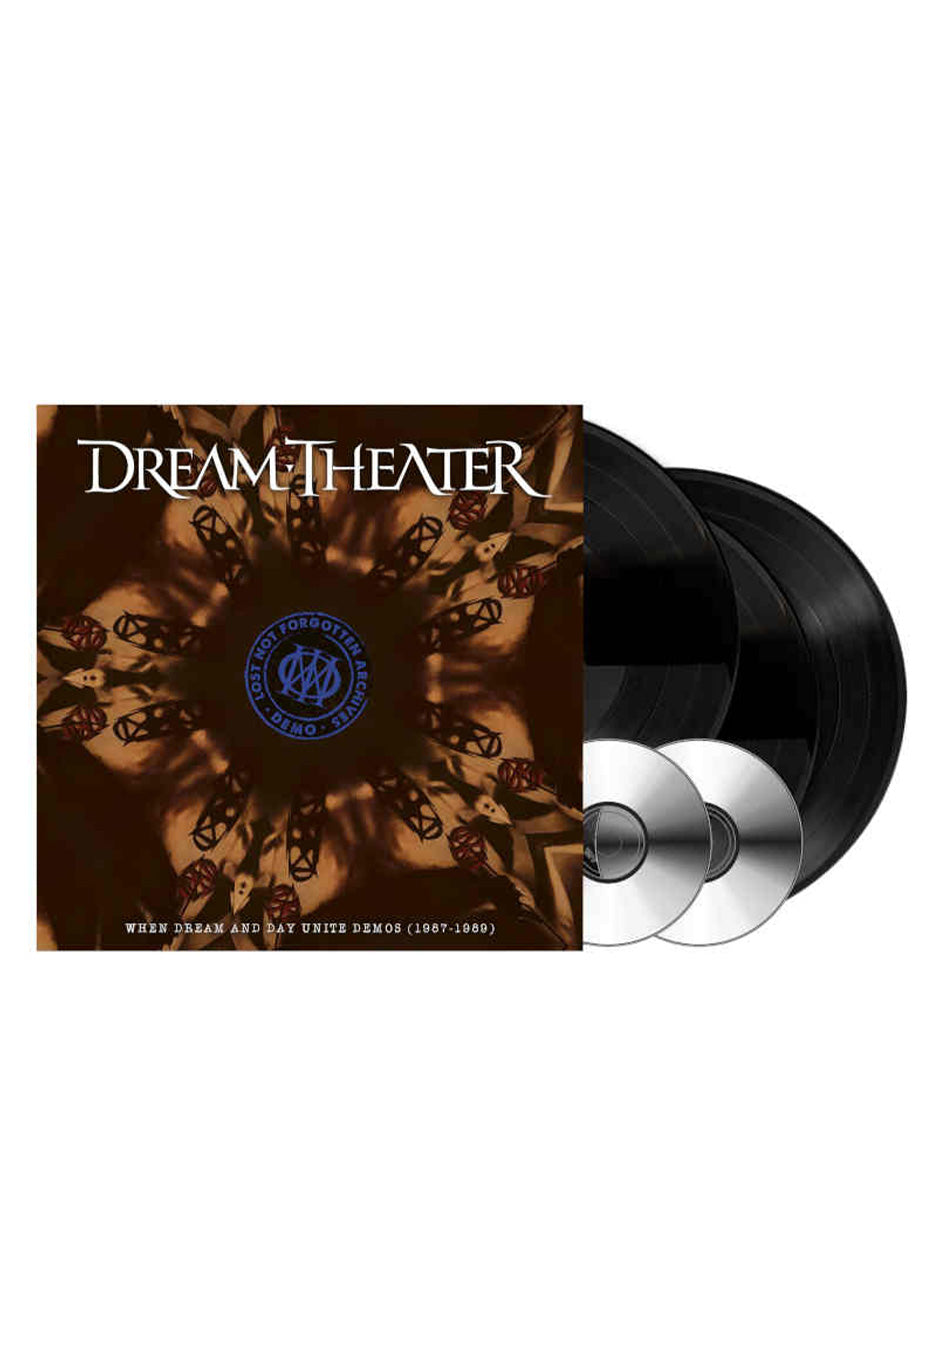 Dream Theater - Lost Not Forgotten Archives: When Dream And Ay Unite Demos (1987 - 1989) - 3 Vinyl + 2 CD